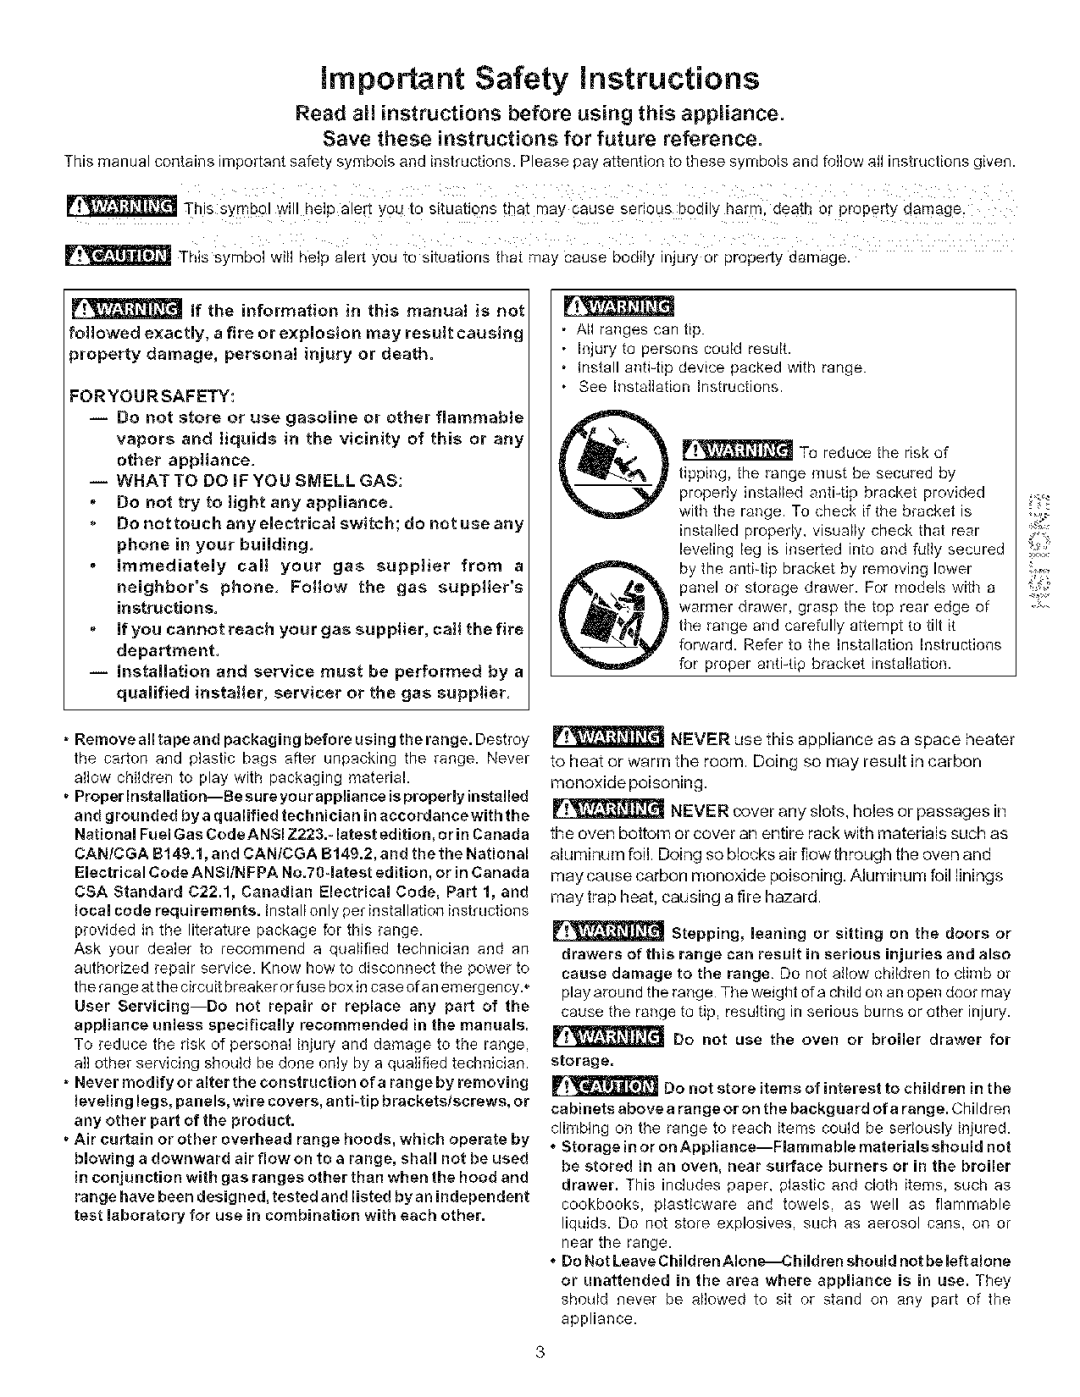 Kenmore 790.7115, 790.7116 manual Important Safety instructions 